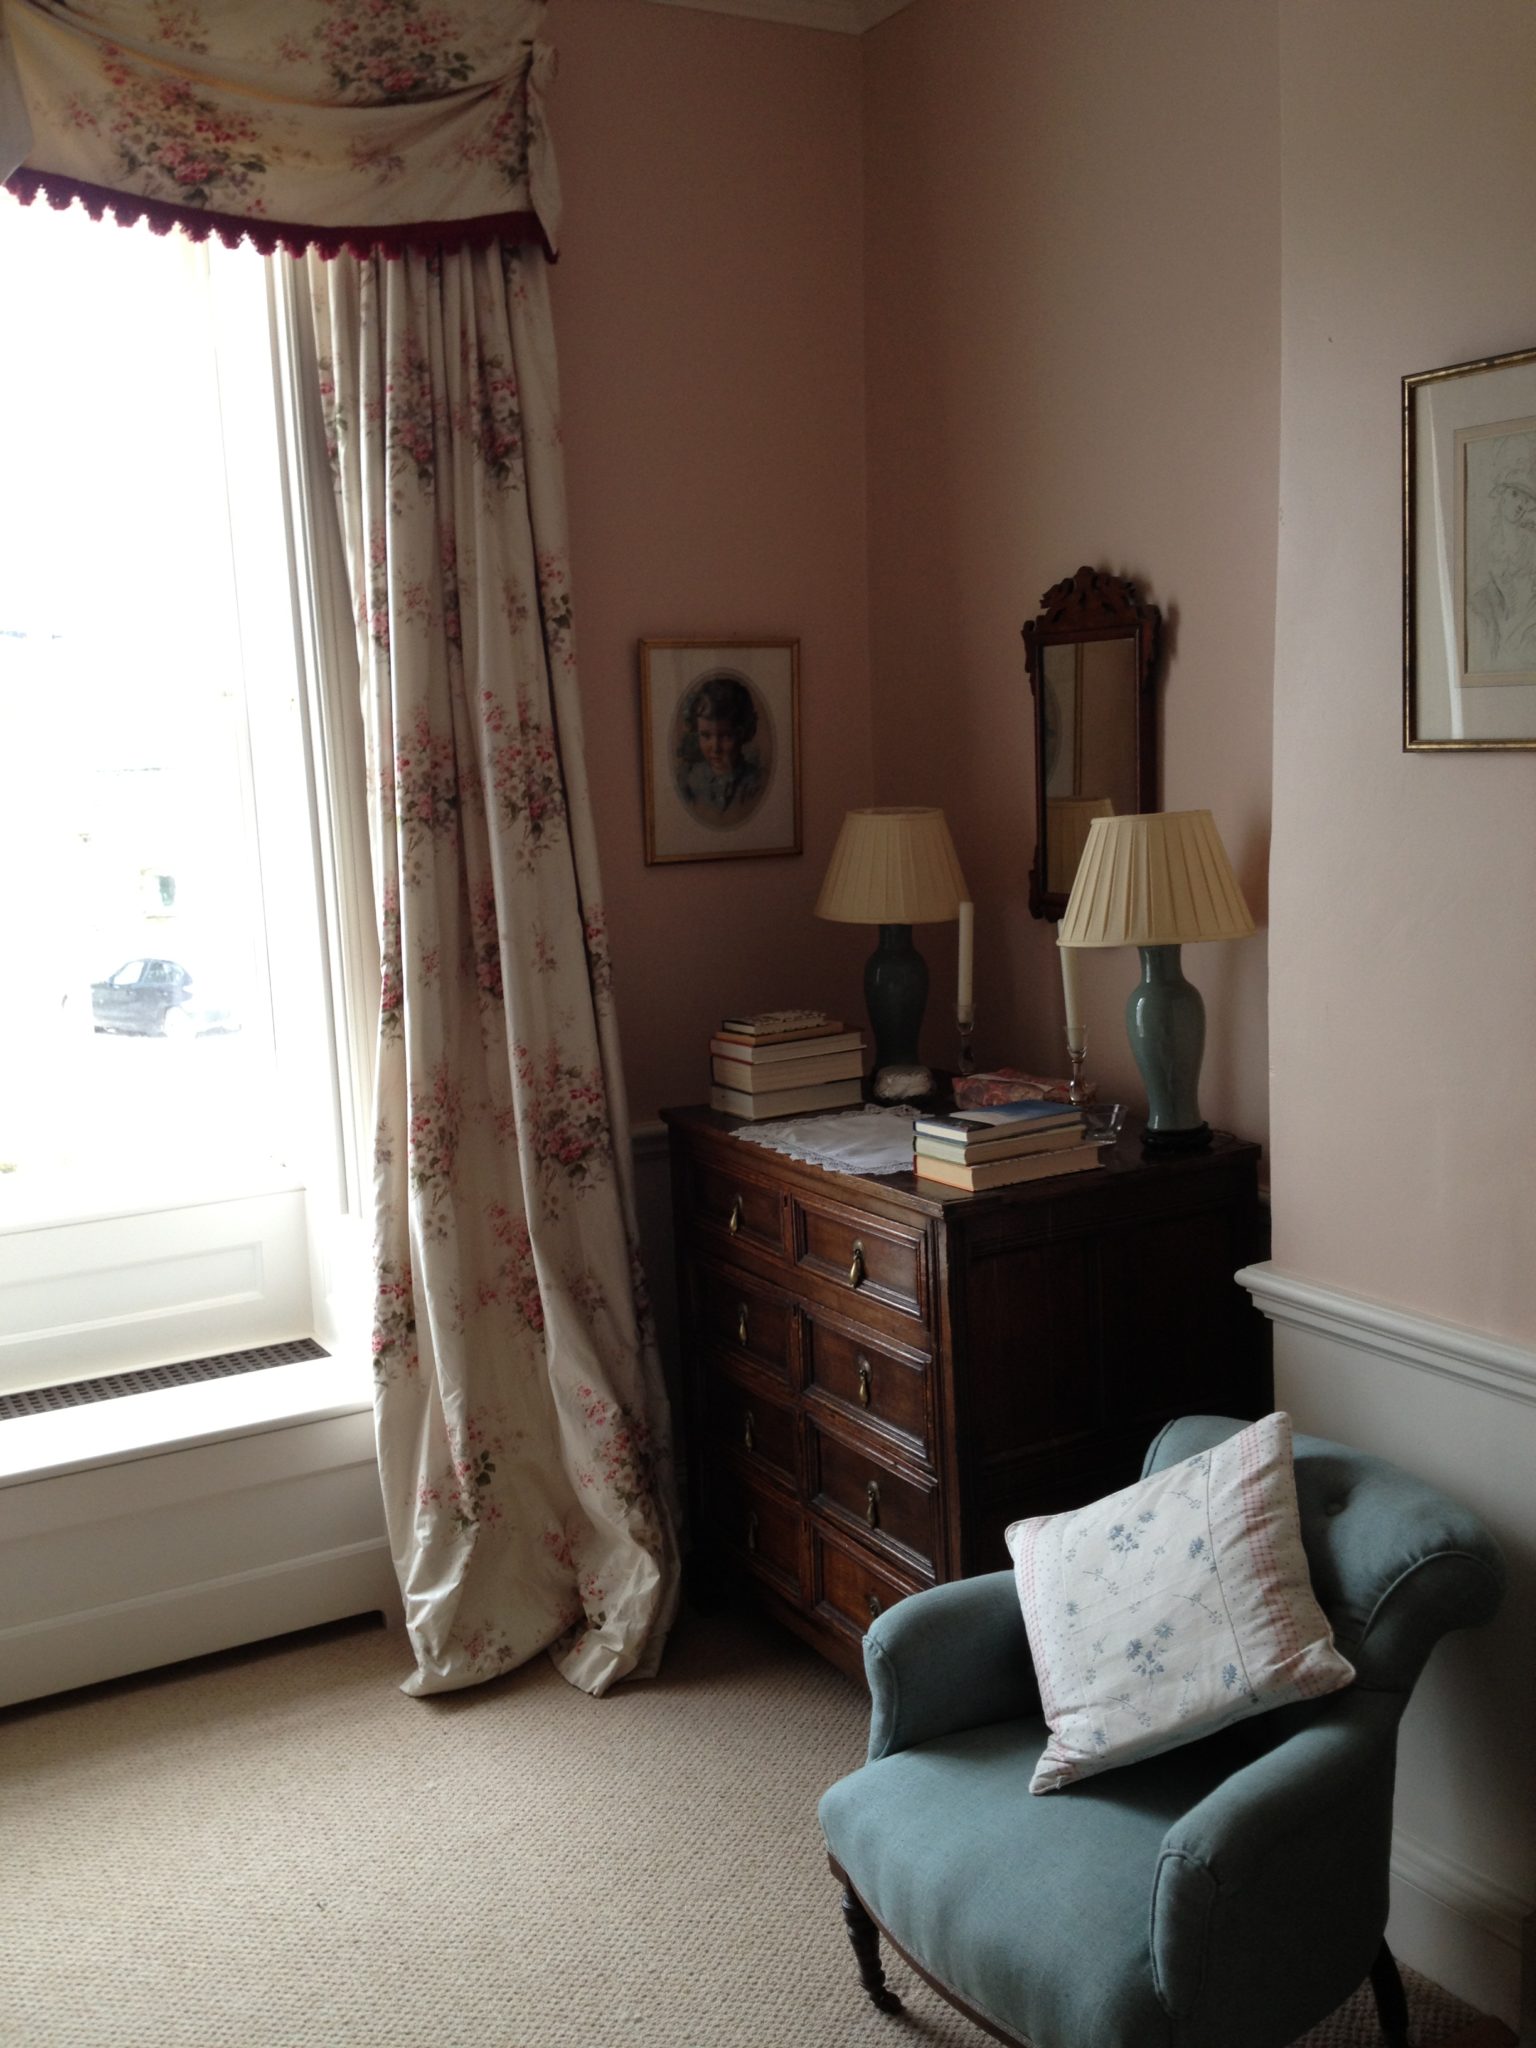 Farrow & Ball Pink ground creates a classic but feminine feel with the mahogany furniture preventing it from feeling sickly